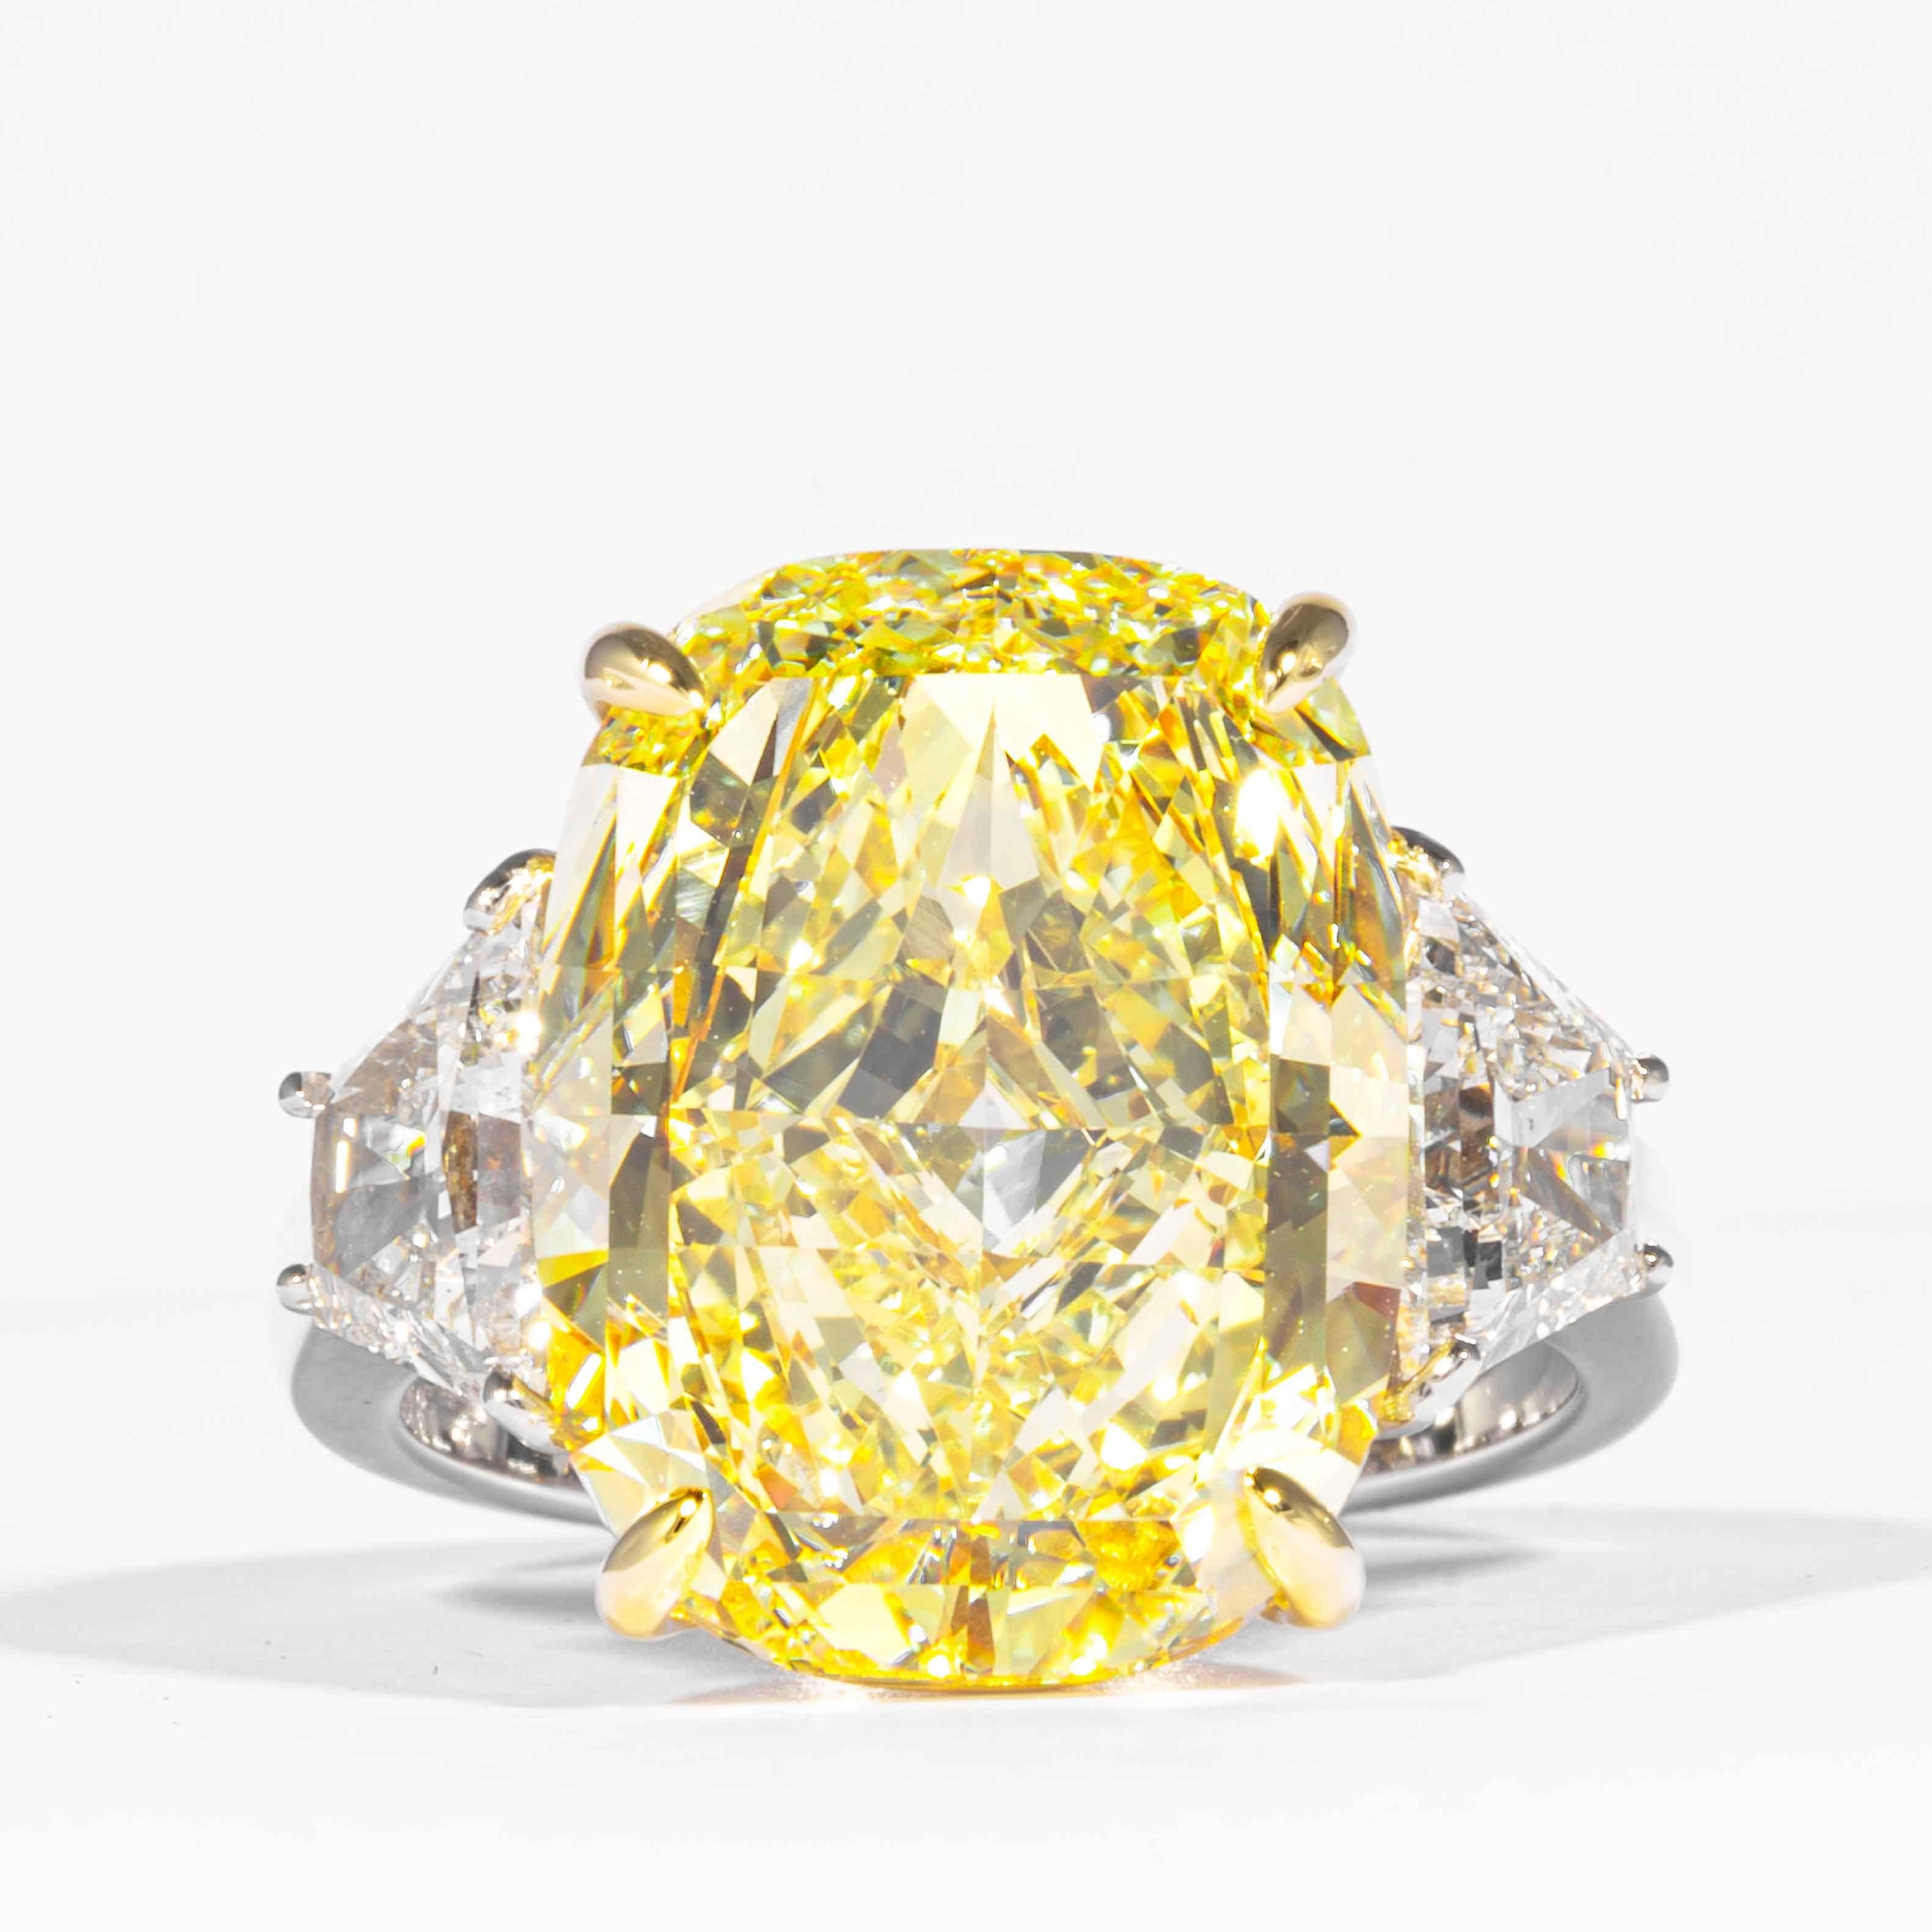 This fancy yellow cushion cut diamond is offered by Shreve, Crump & Low.  This fancy yellow cushion cut diamond is custom set in a handcrafted Shreve, Crump & Low platinum and 18 karat yellow gold 3 stone ring consisting of 1 cushion cut yellow